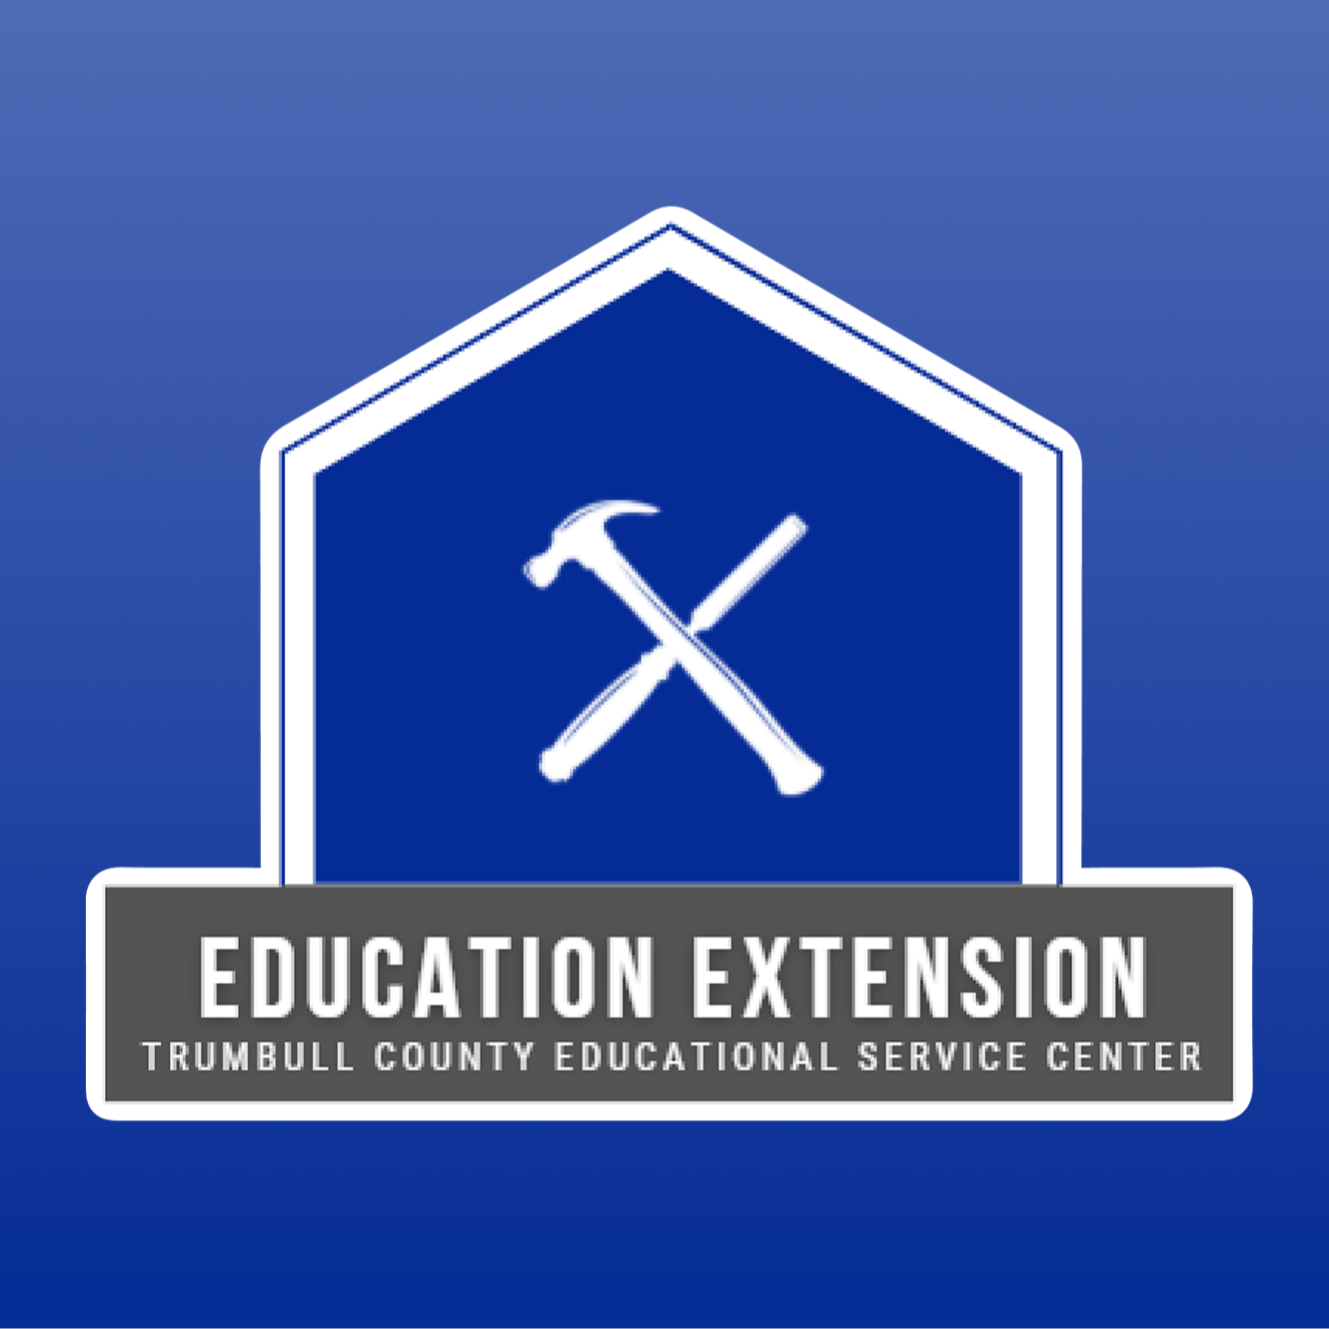 education extension trumbull county educational service center